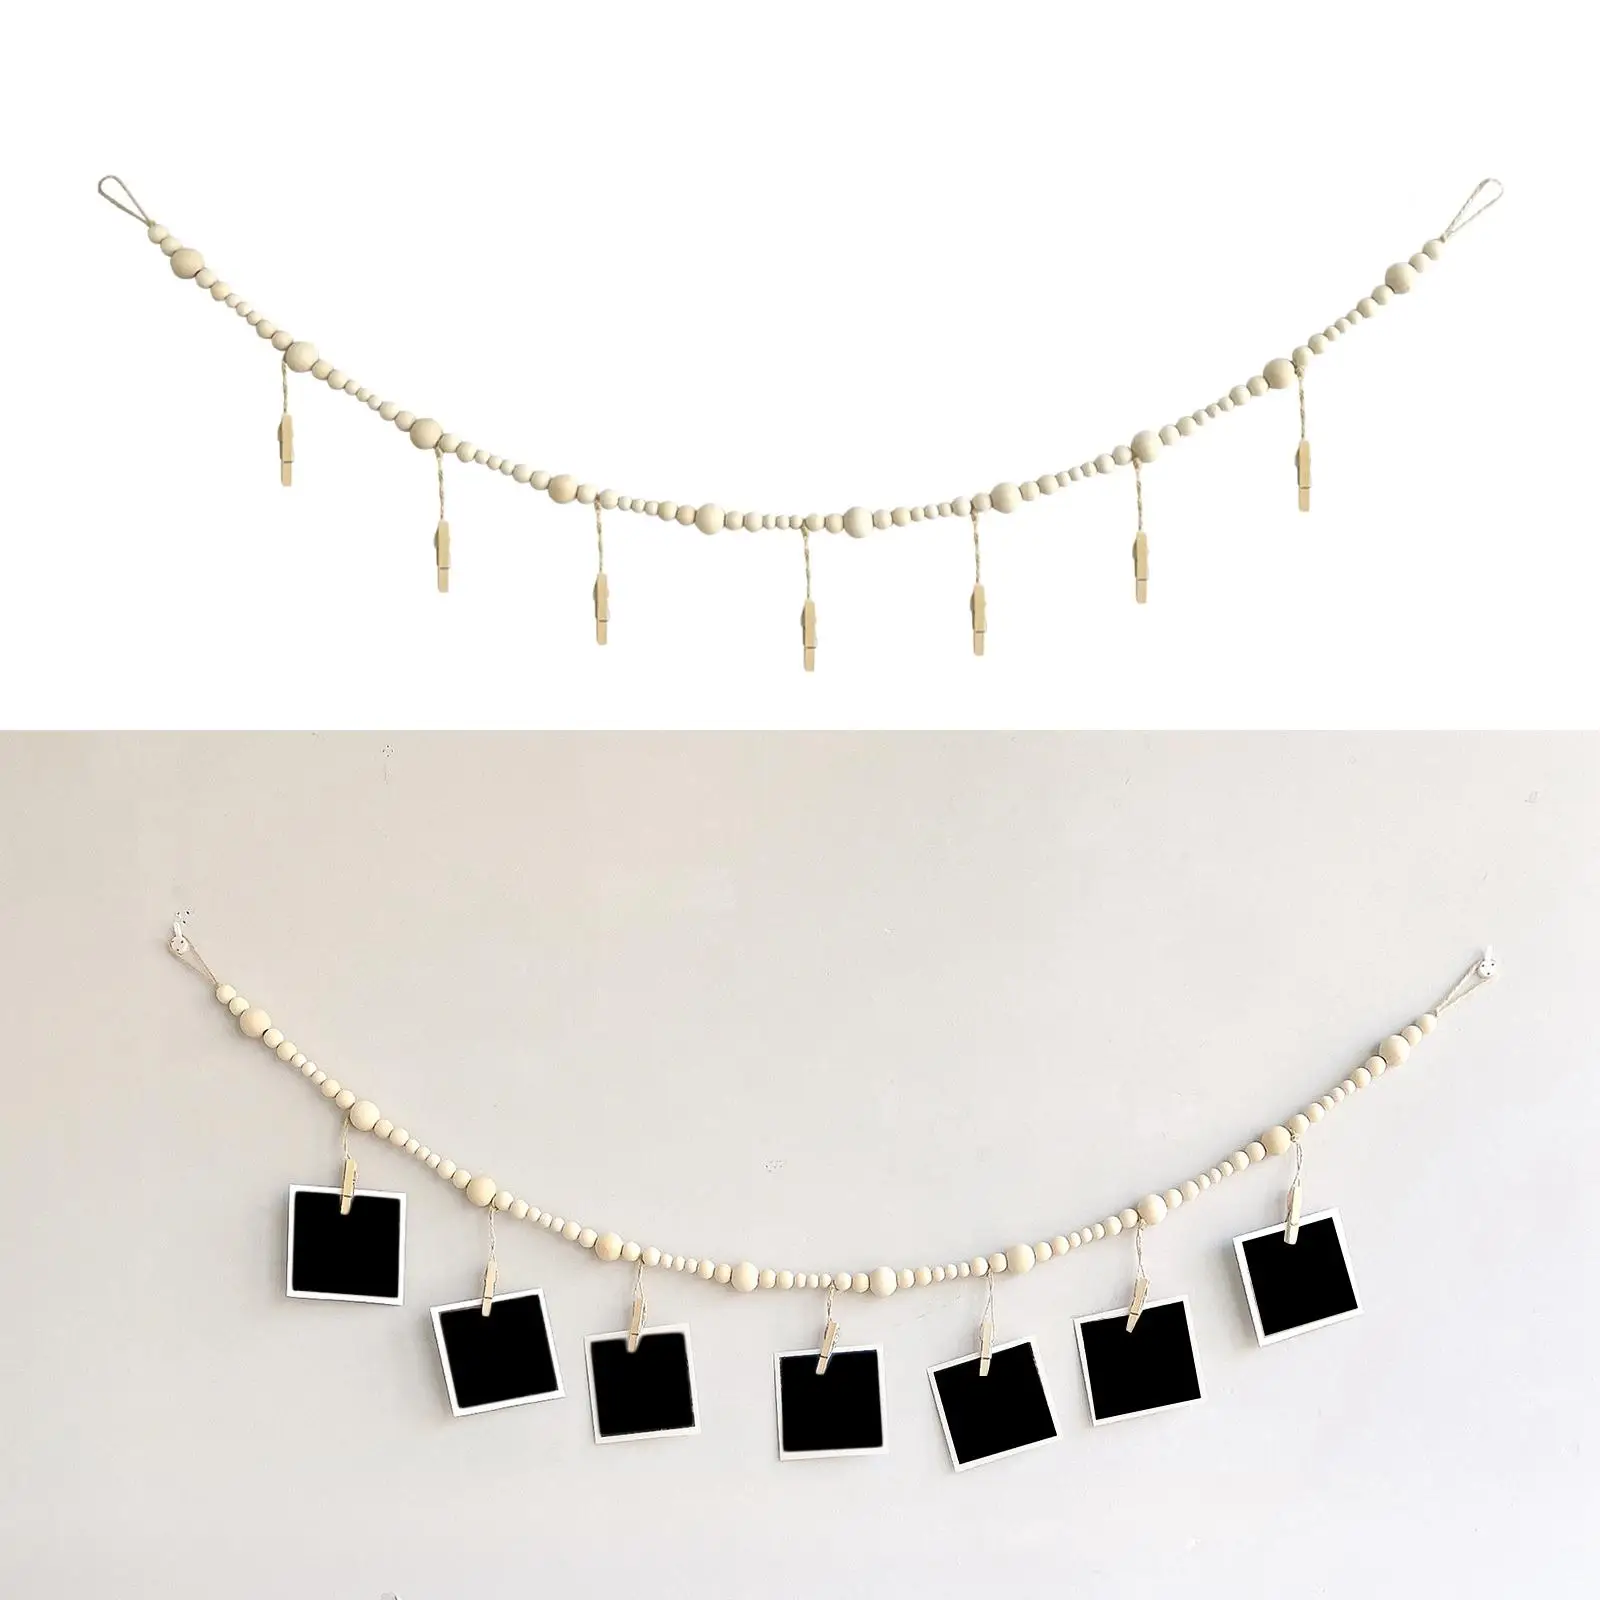 Hanging Photo Display DIY Collage with Wood Clips Picture Frame Garland for Bedroom Office Dormitory Gift Decoration Teen Girl